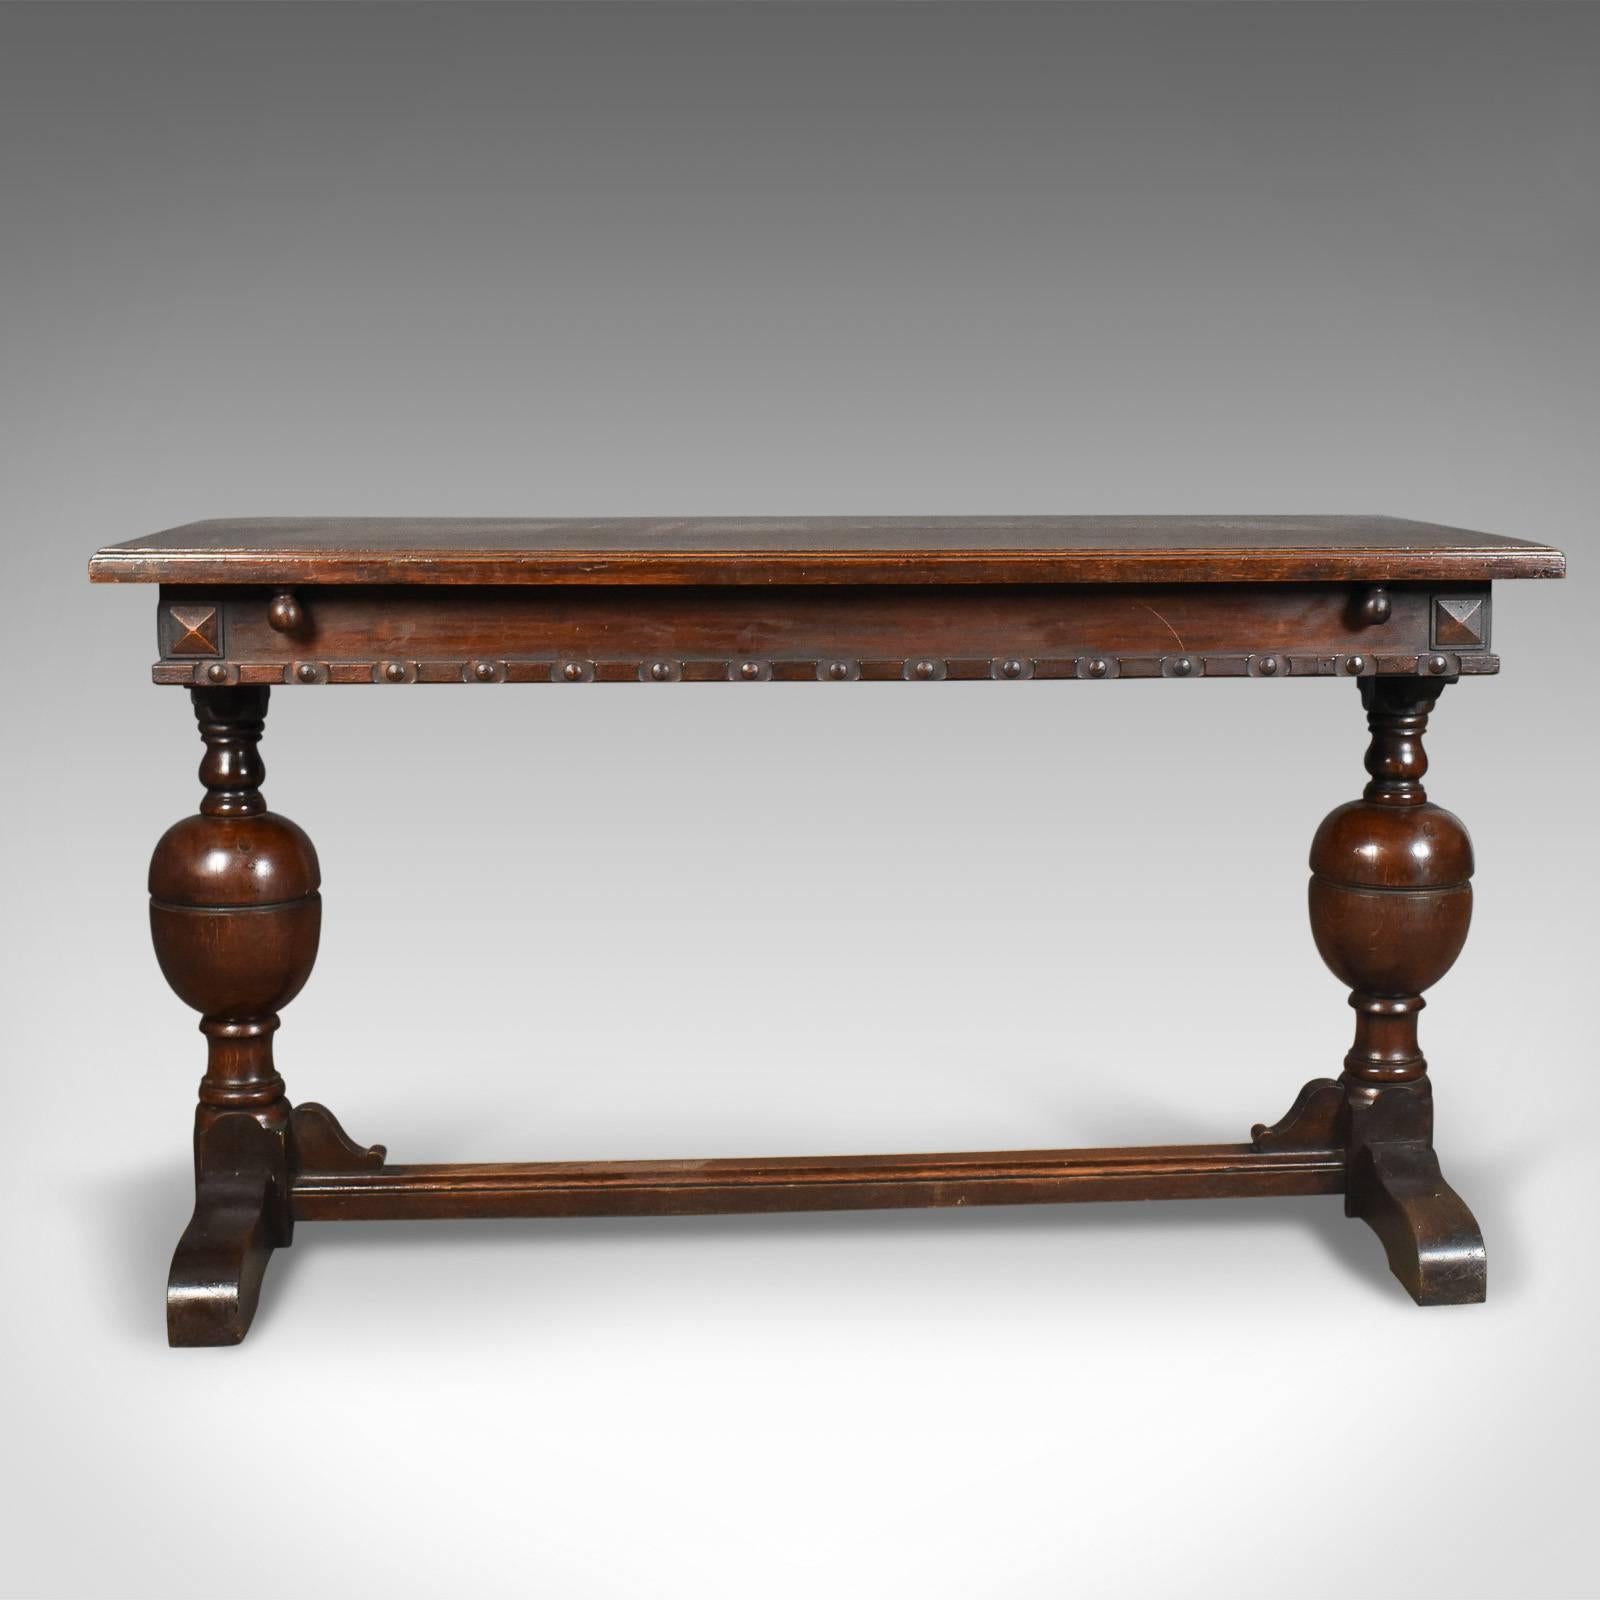 This is an extending antique dining table in the 17th century refectory taste, English, oak circa 1900. Seats four-six and offers a generous height.

Solid English oak displaying grain interest and wisps of medullary rays
Good color and a